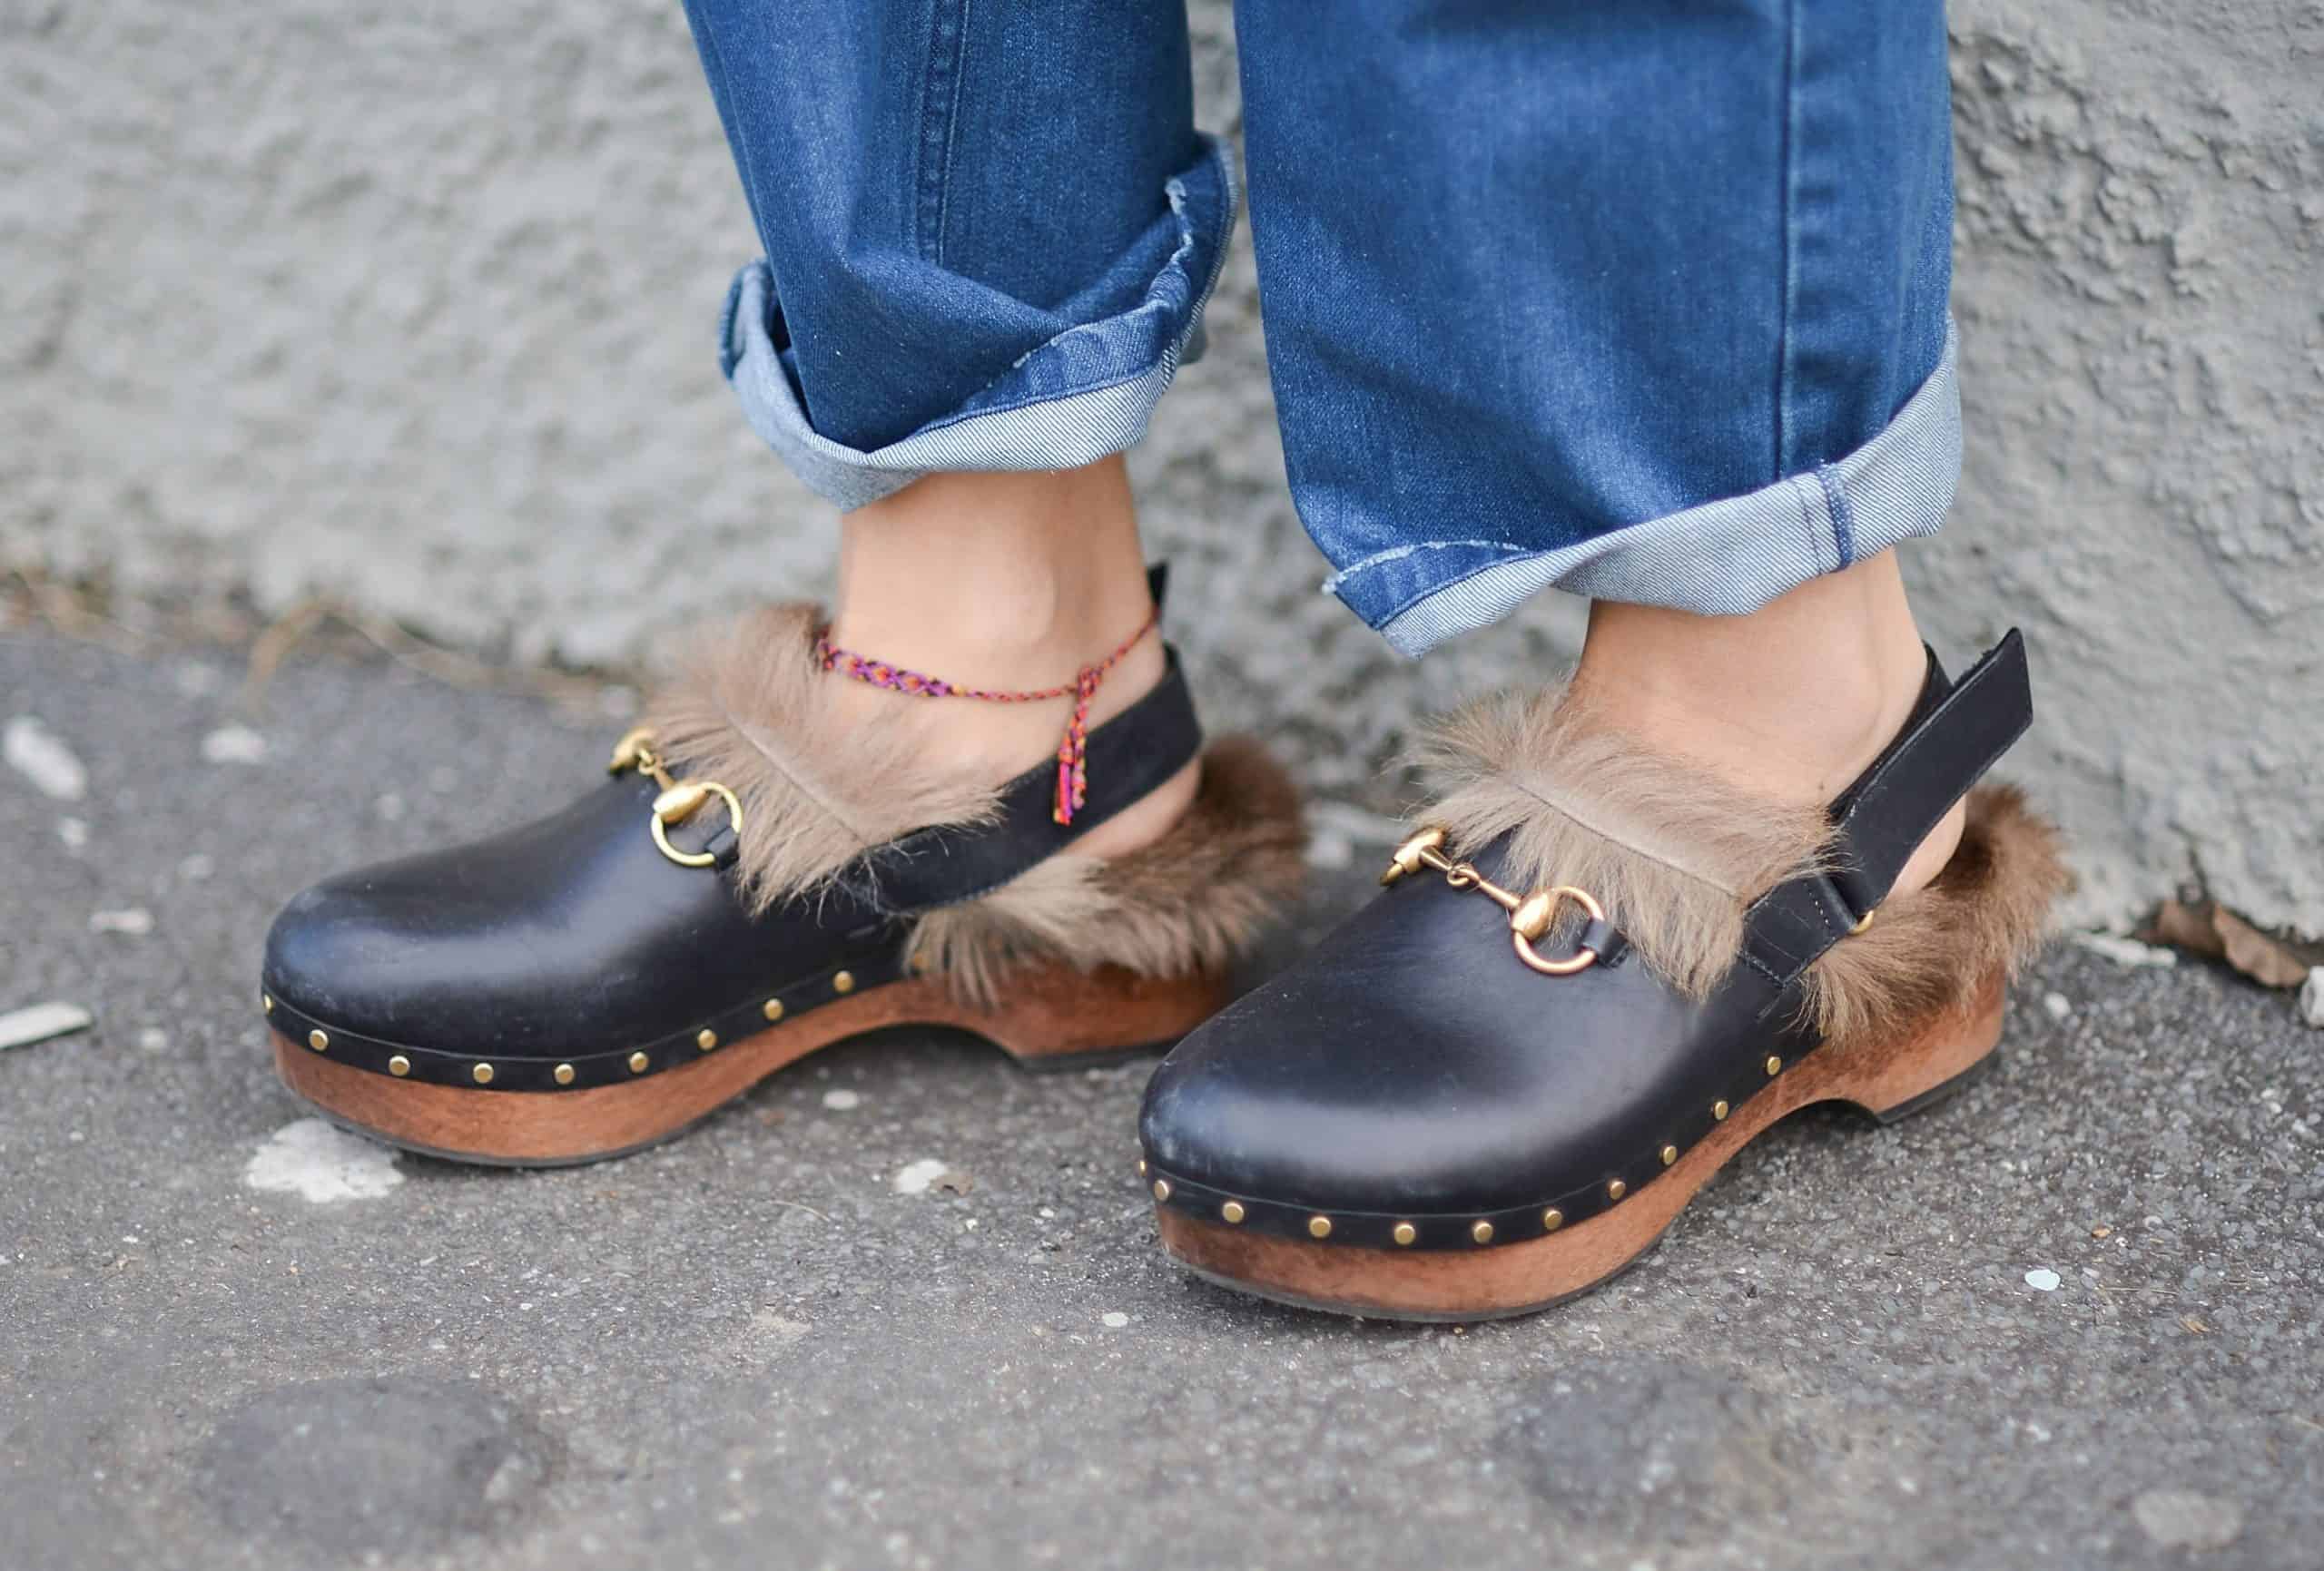 Clogs are back in style. How to wear one of the trendiest shoes this spring?